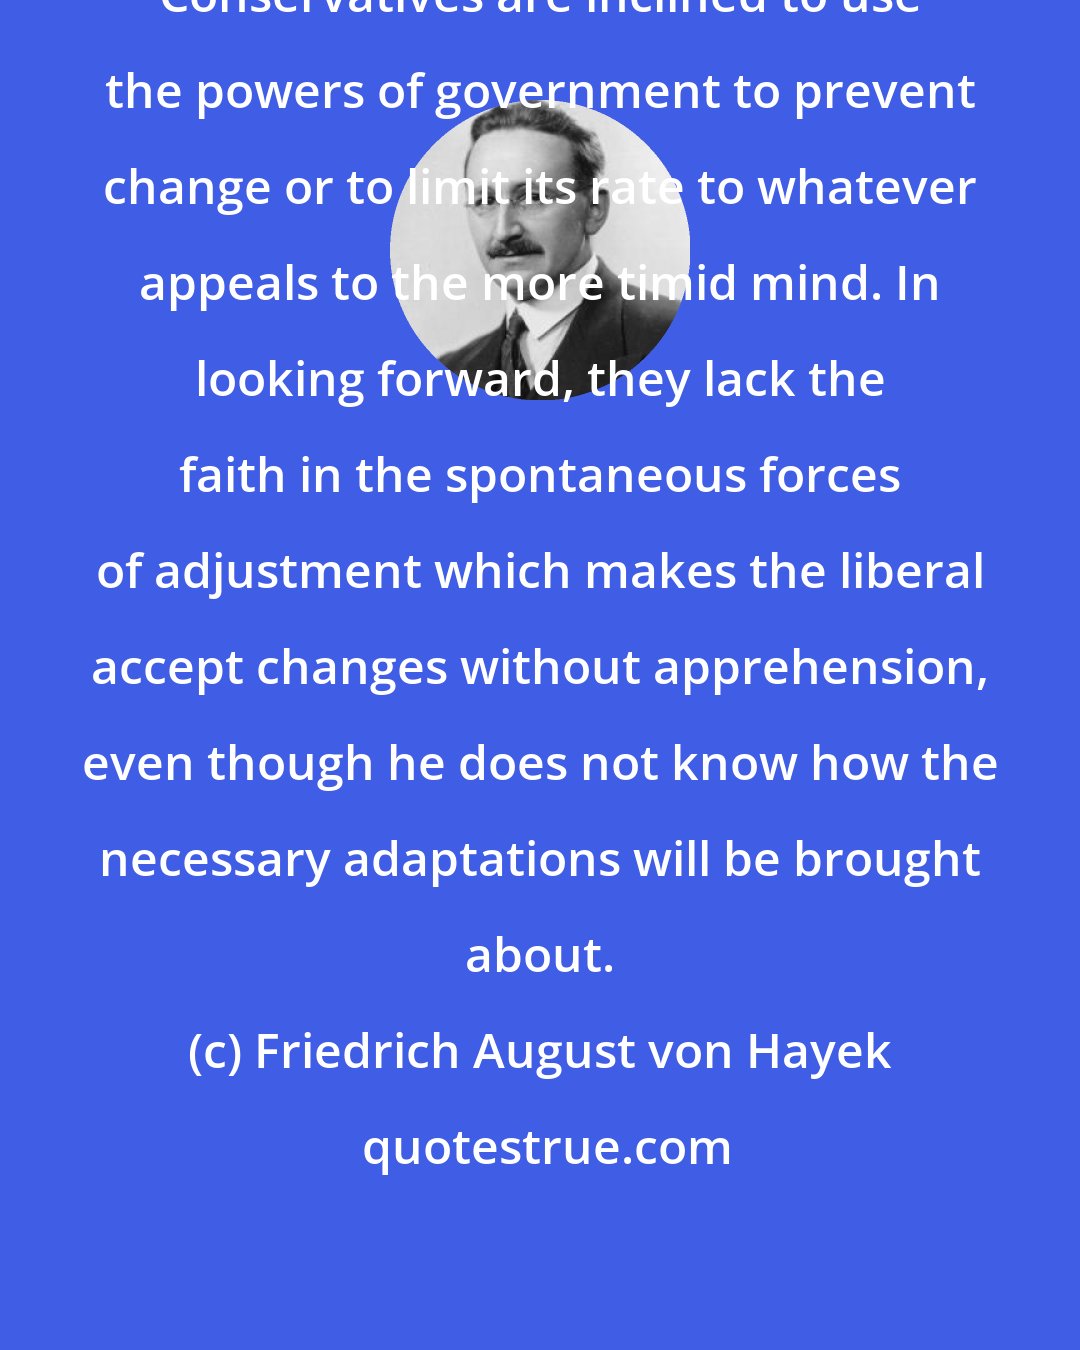 Friedrich August von Hayek: Conservatives are inclined to use the powers of government to prevent change or to limit its rate to whatever appeals to the more timid mind. In looking forward, they lack the faith in the spontaneous forces of adjustment which makes the liberal accept changes without apprehension, even though he does not know how the necessary adaptations will be brought about.